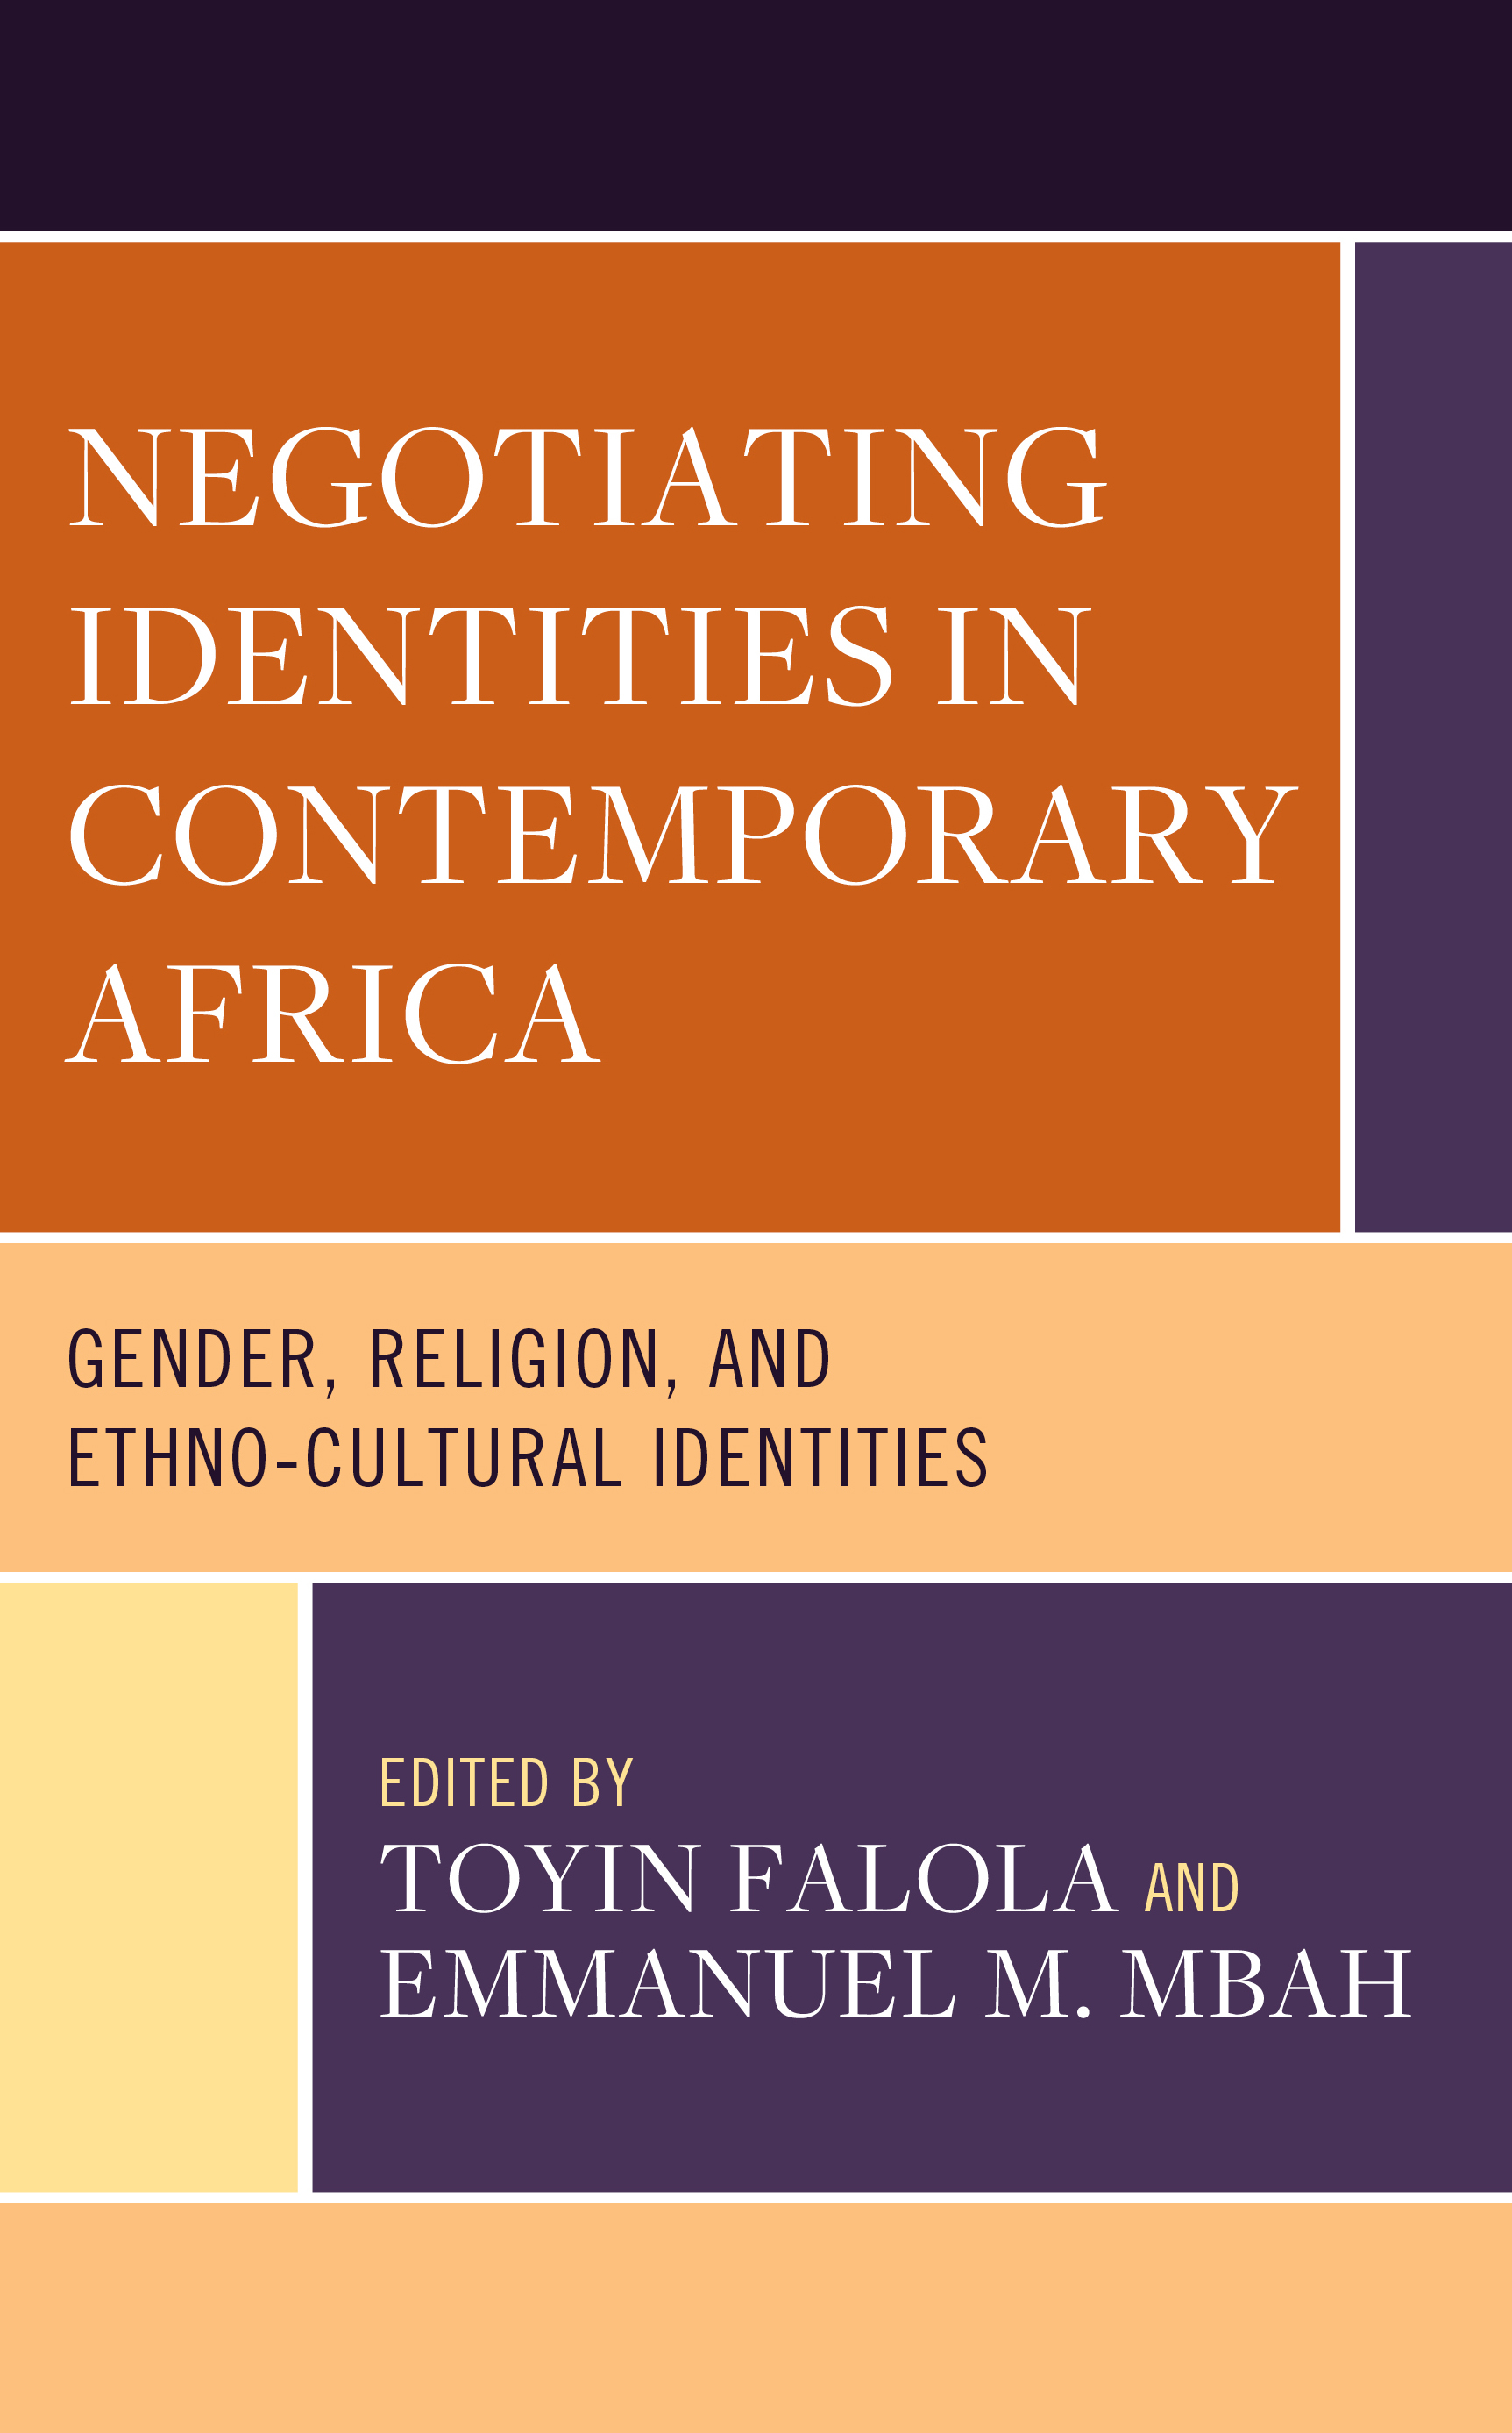 Negotiating Identities in Contemporary Africa: Gender, Religion, and Ethno-cultural Identities